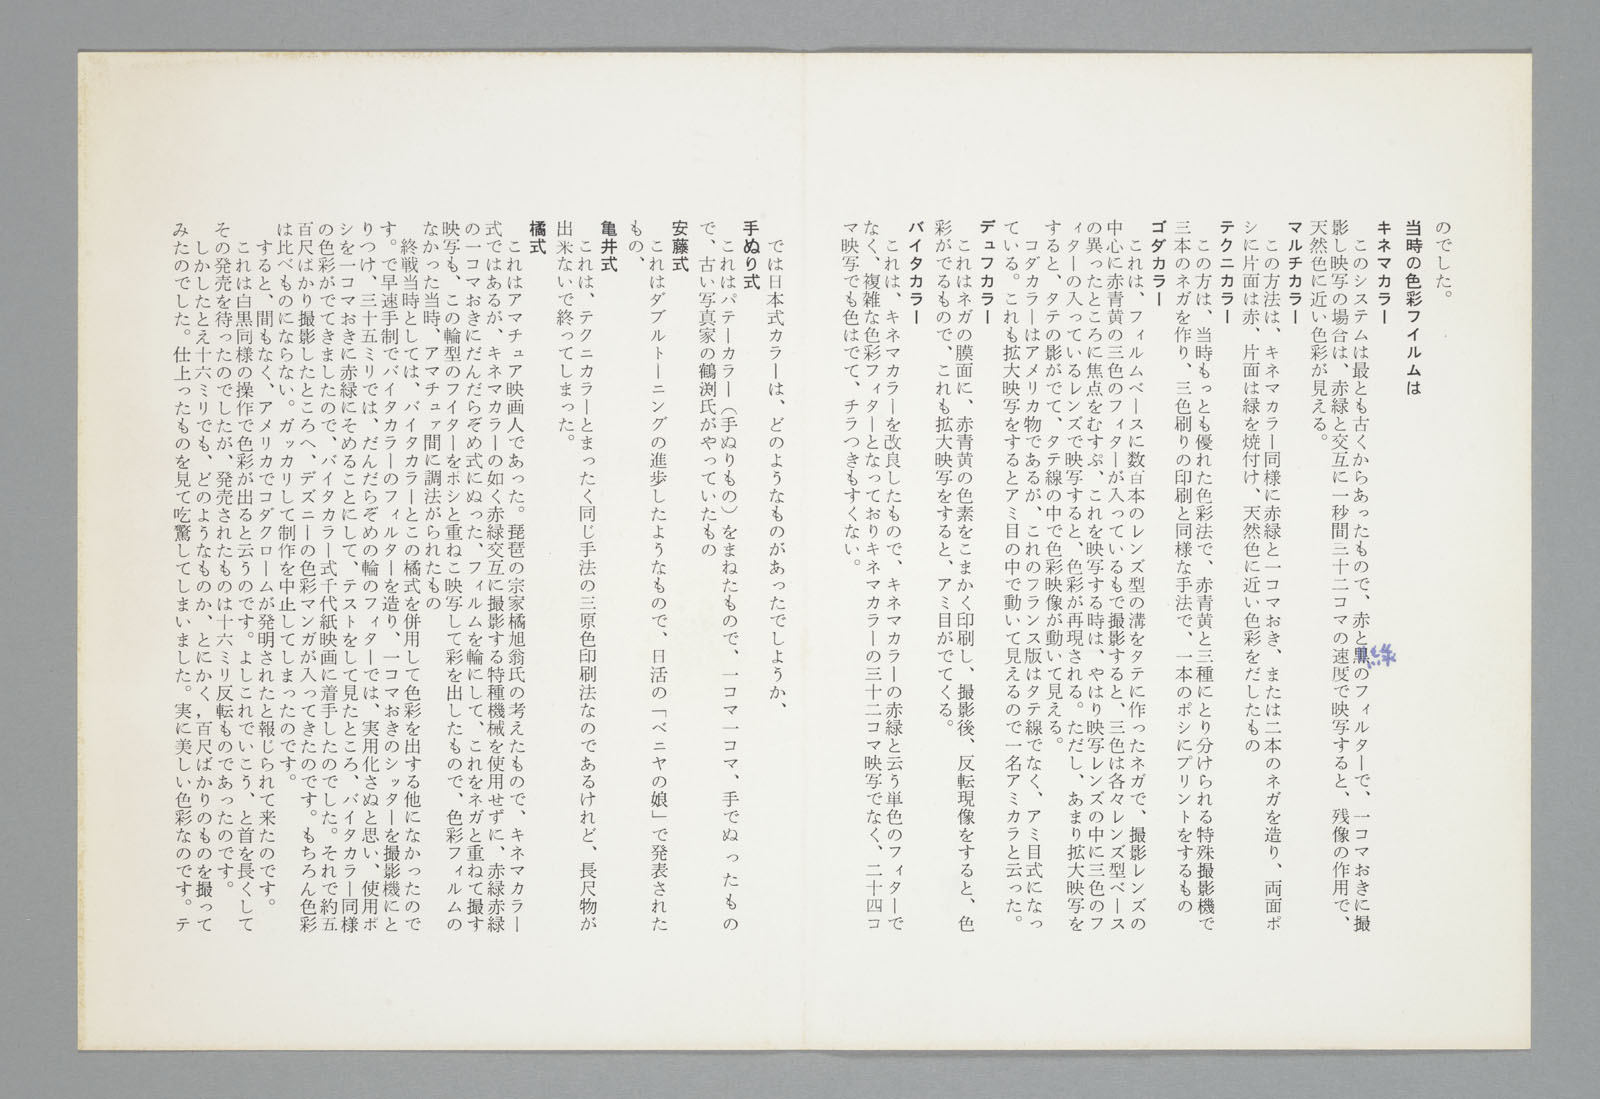 Material for a press release on the production of <i>The Tale of the Bamboo Cutter</i>